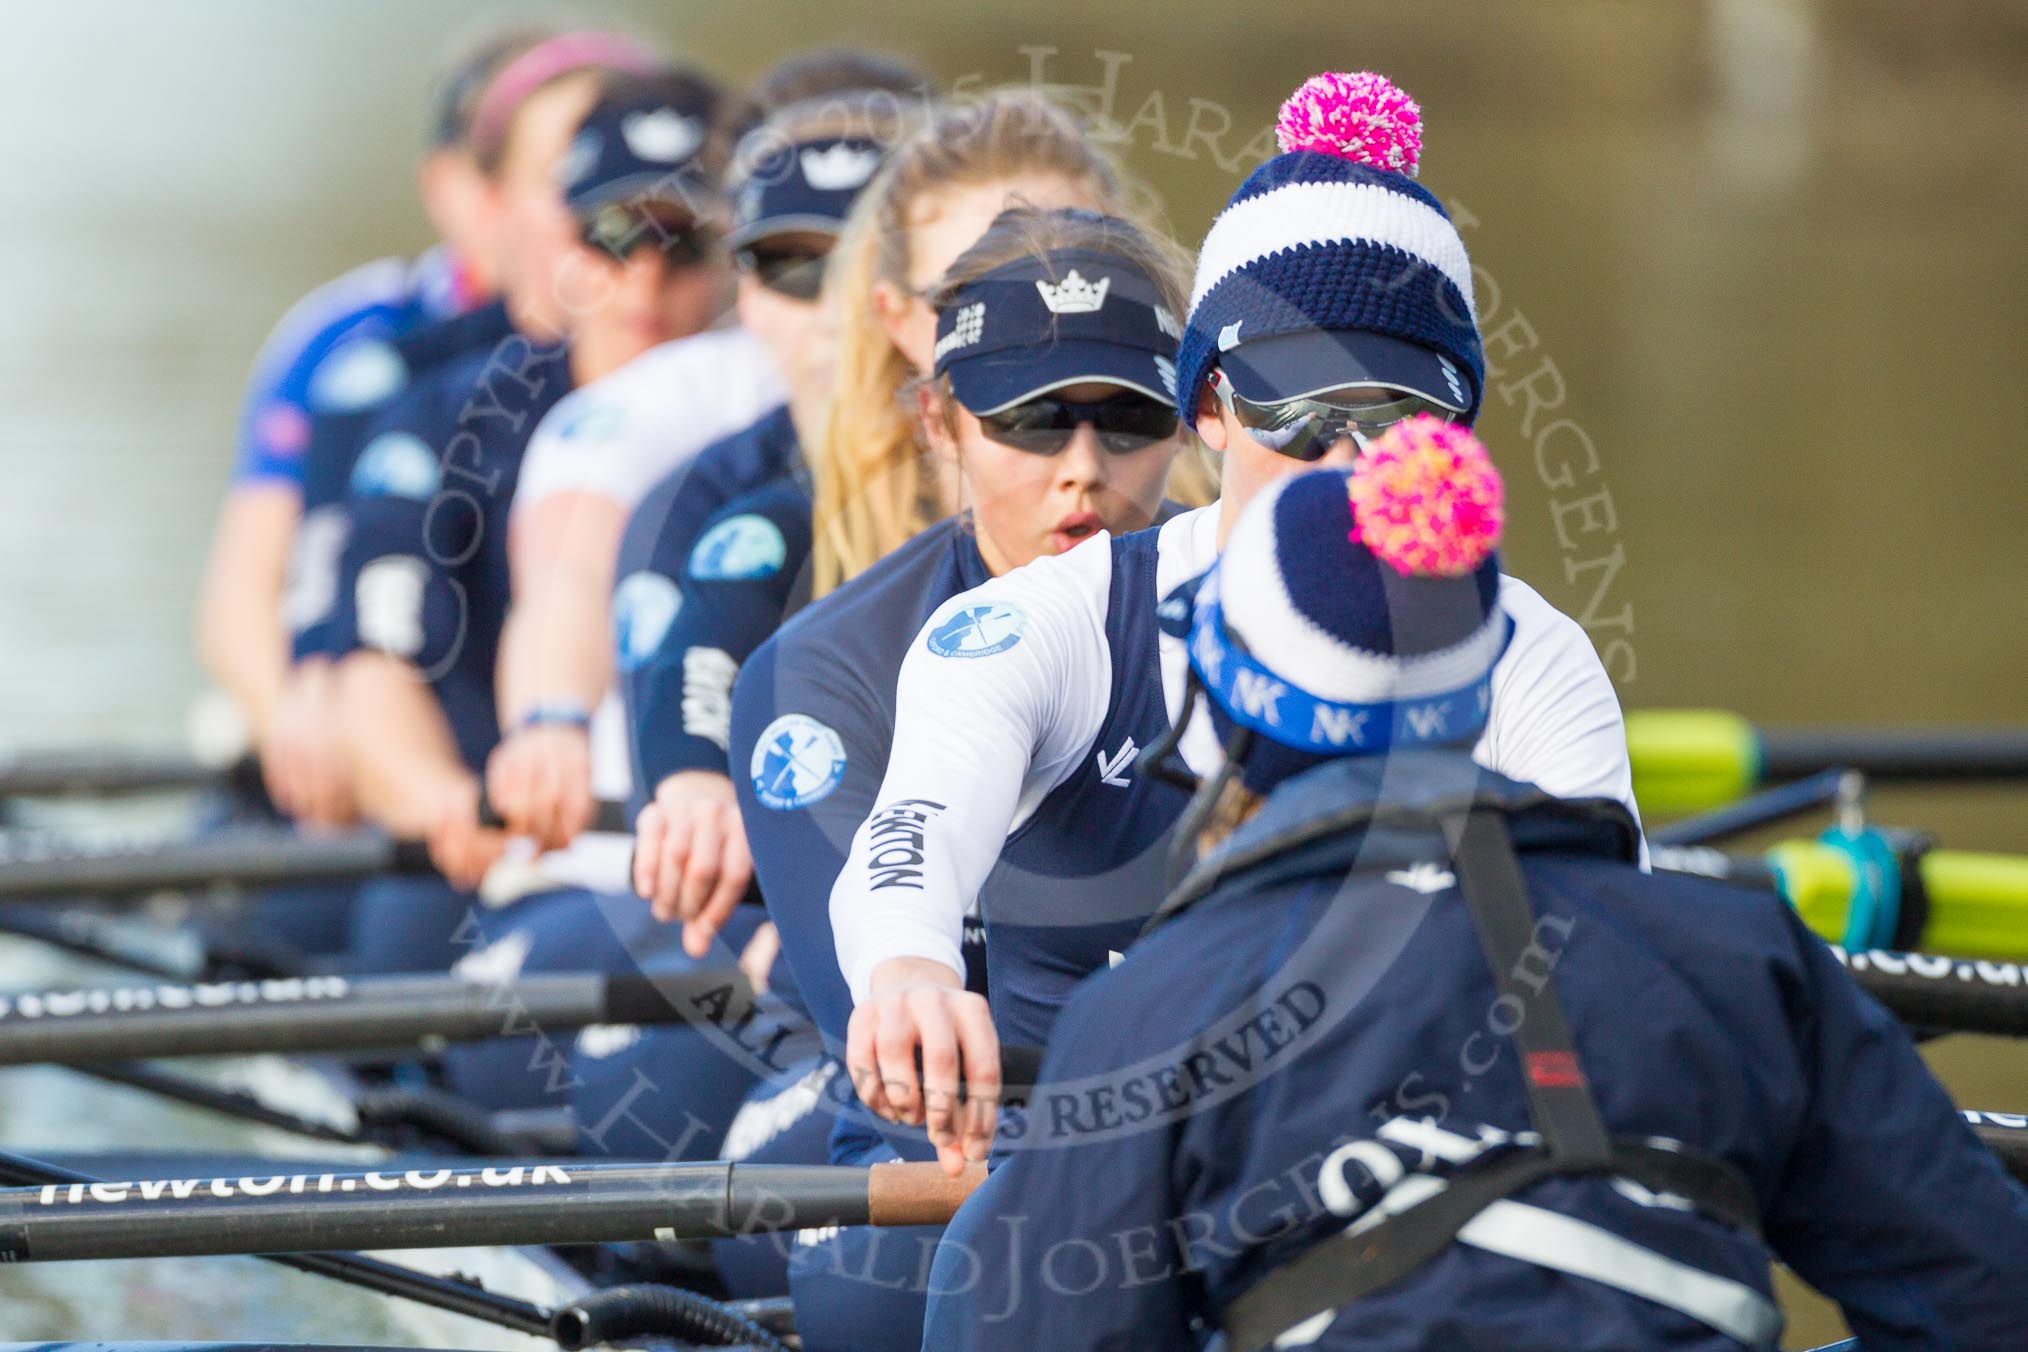 The Boat Race season 2015: OUWBC training Wallingford.

Wallingford,

United Kingdom,
on 04 March 2015 at 16:04, image #156